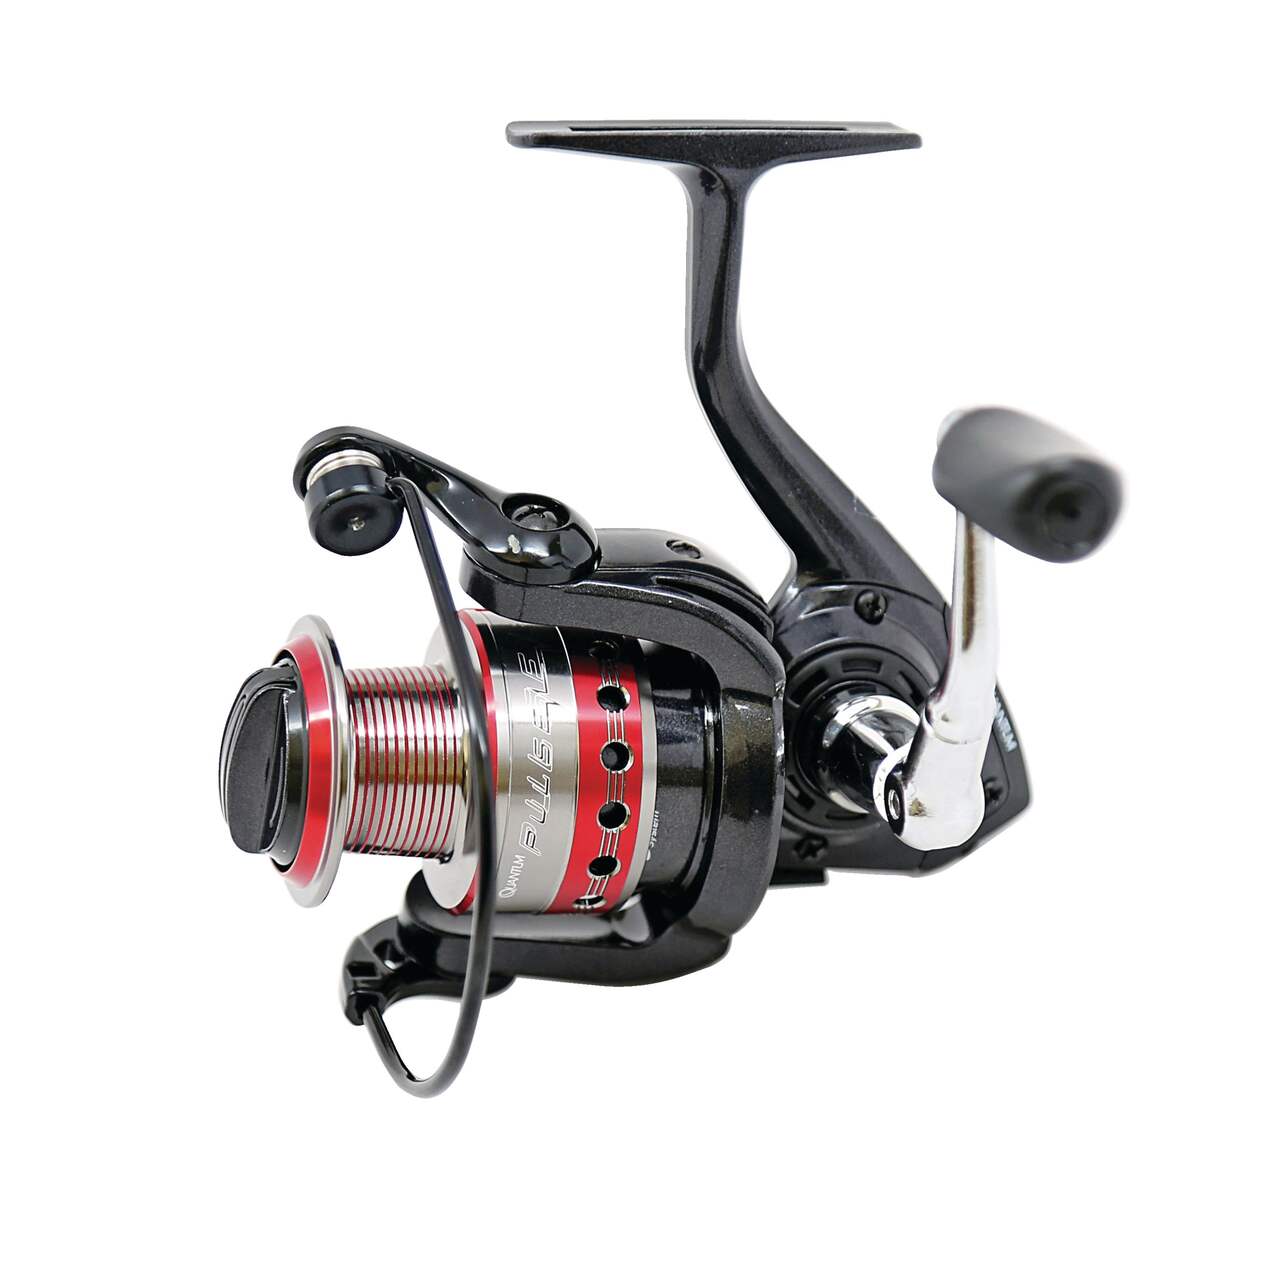  Clearance Saltwater Fishing Reels